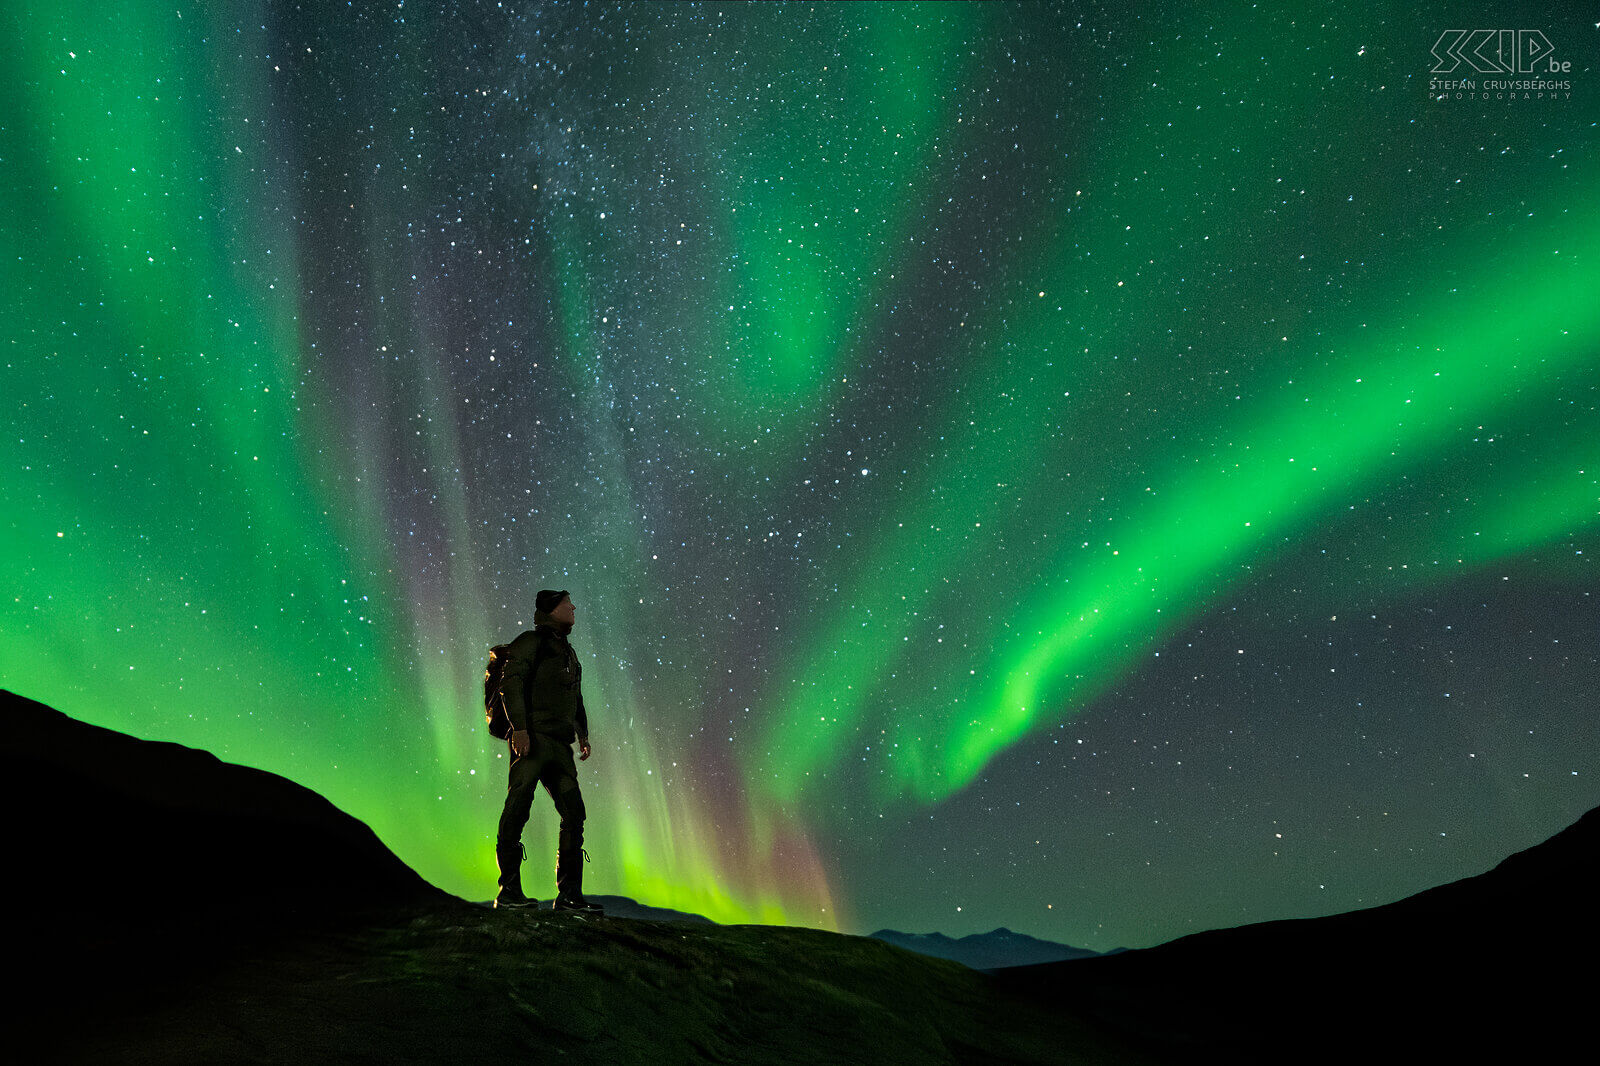 Storsteinnes - Northern lights - Selfie Last selfie with some northern lights. The last and unforgettable night in the far north and the end of a beautiful photography trip Stefan Cruysberghs